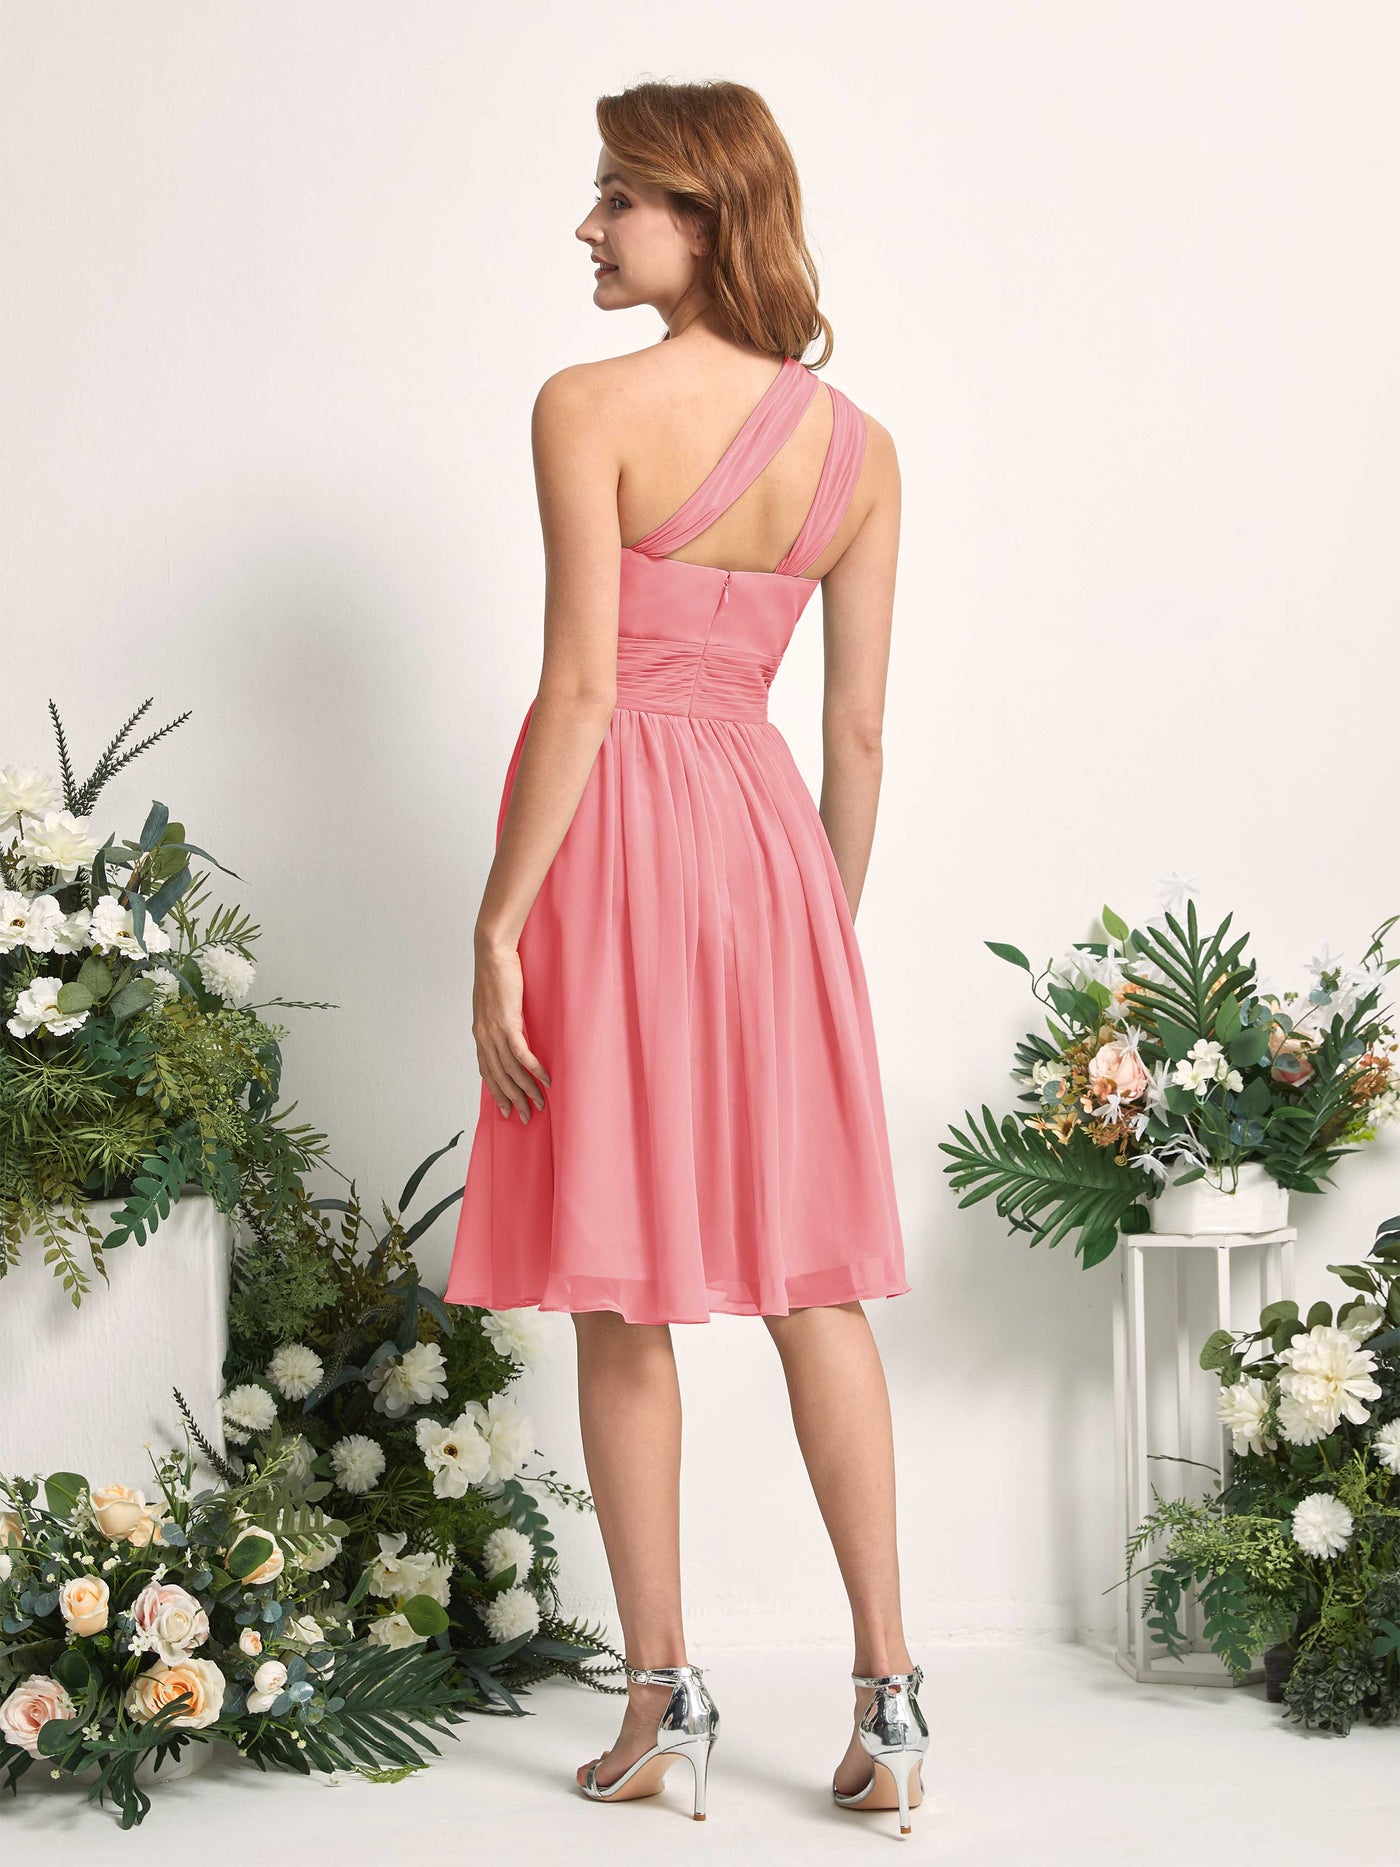 Bridesmaid Dress A-line Chiffon One Shoulder Knee Length Sleeveless Wedding Party Dress - Coral Pink (81221230)#color_coral-pink